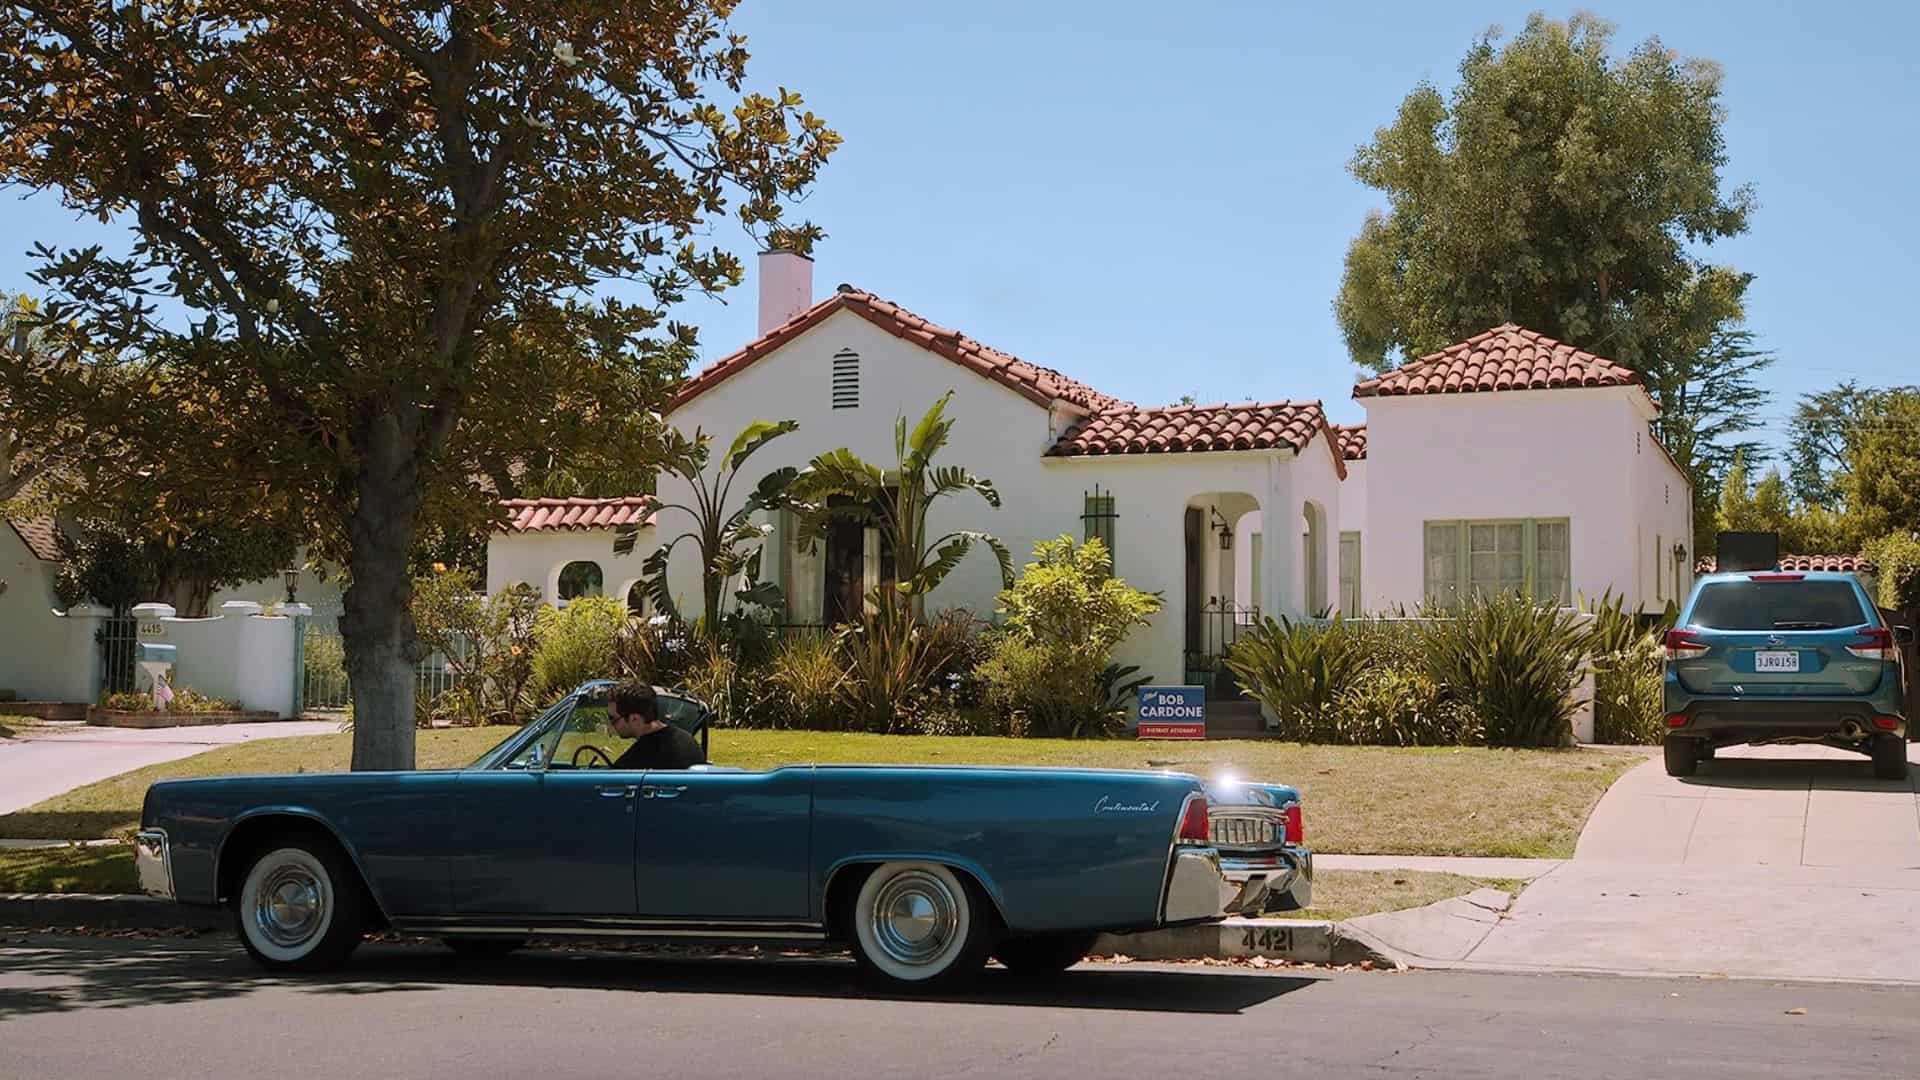 Manuel Garcia-Rulfo sits in a blue Lincoln Town Car in front of a house in this image from A+E Studios.